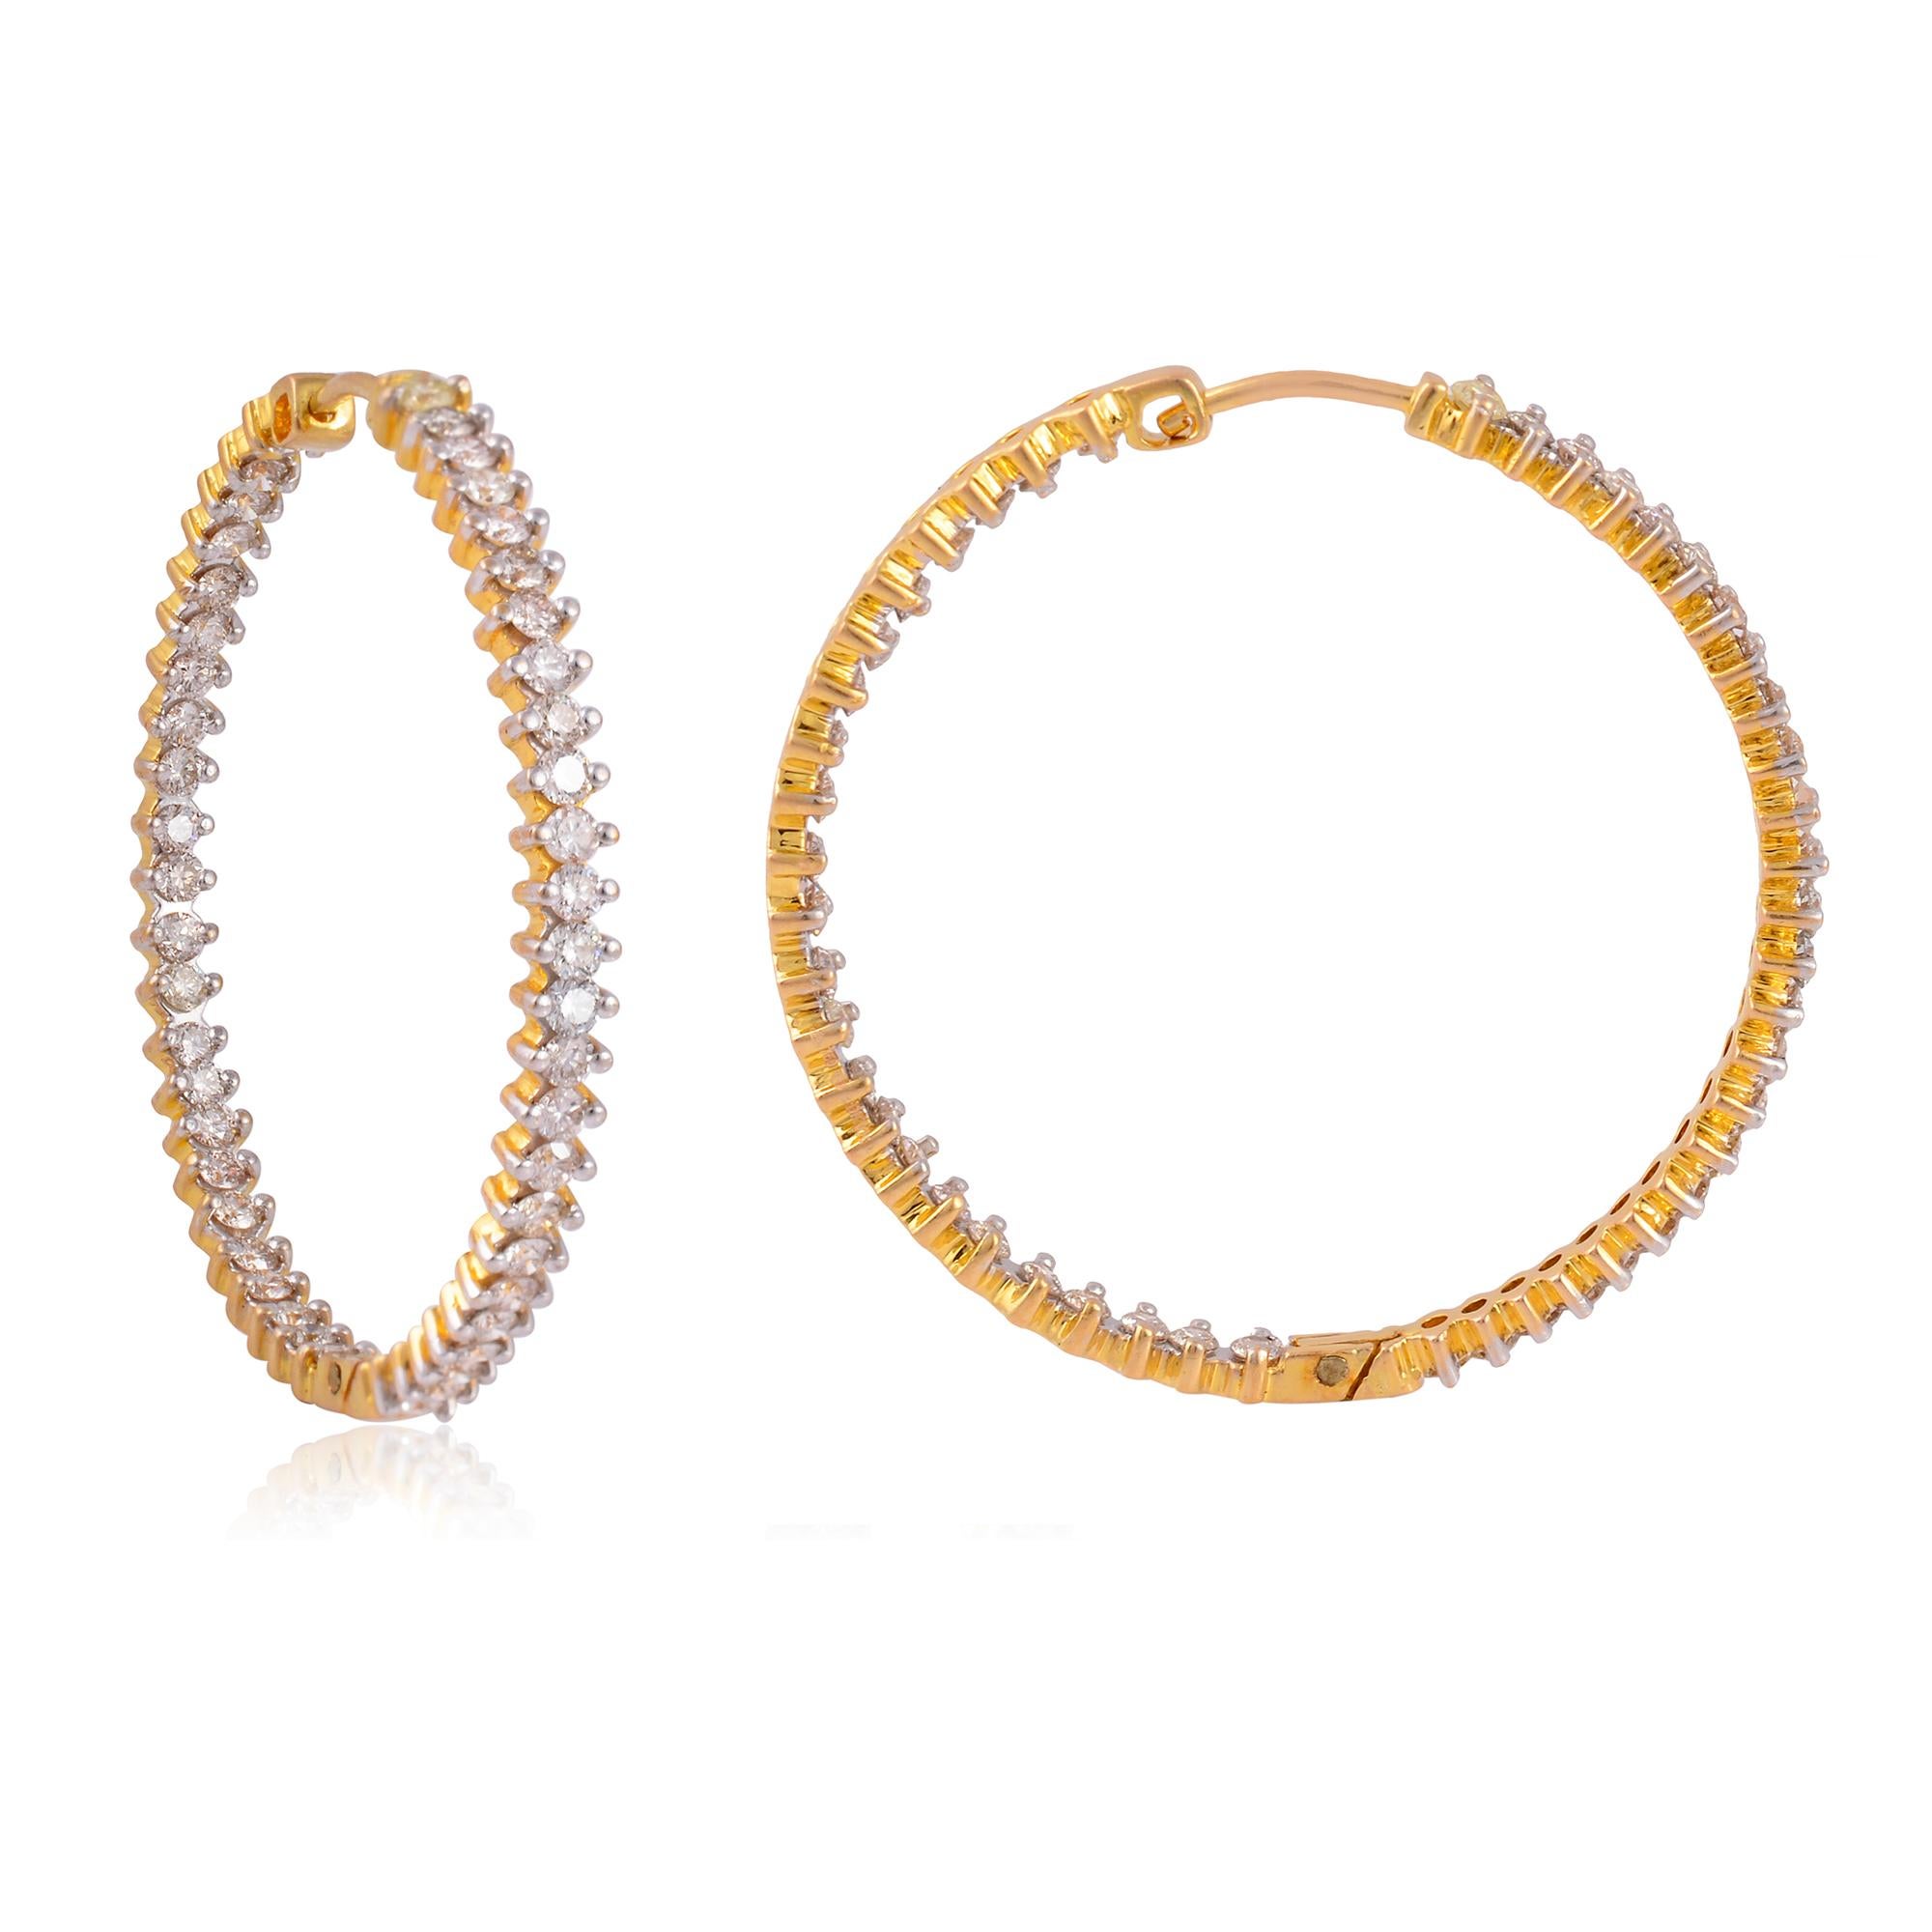 The diamonds are set in 14 karat yellow gold, a beautiful and classic choice for fine jewelry. Yellow gold has a warm and rich tone that complements the brilliance of the diamonds.
The hoop design adds a touch of elegance and versatility to the